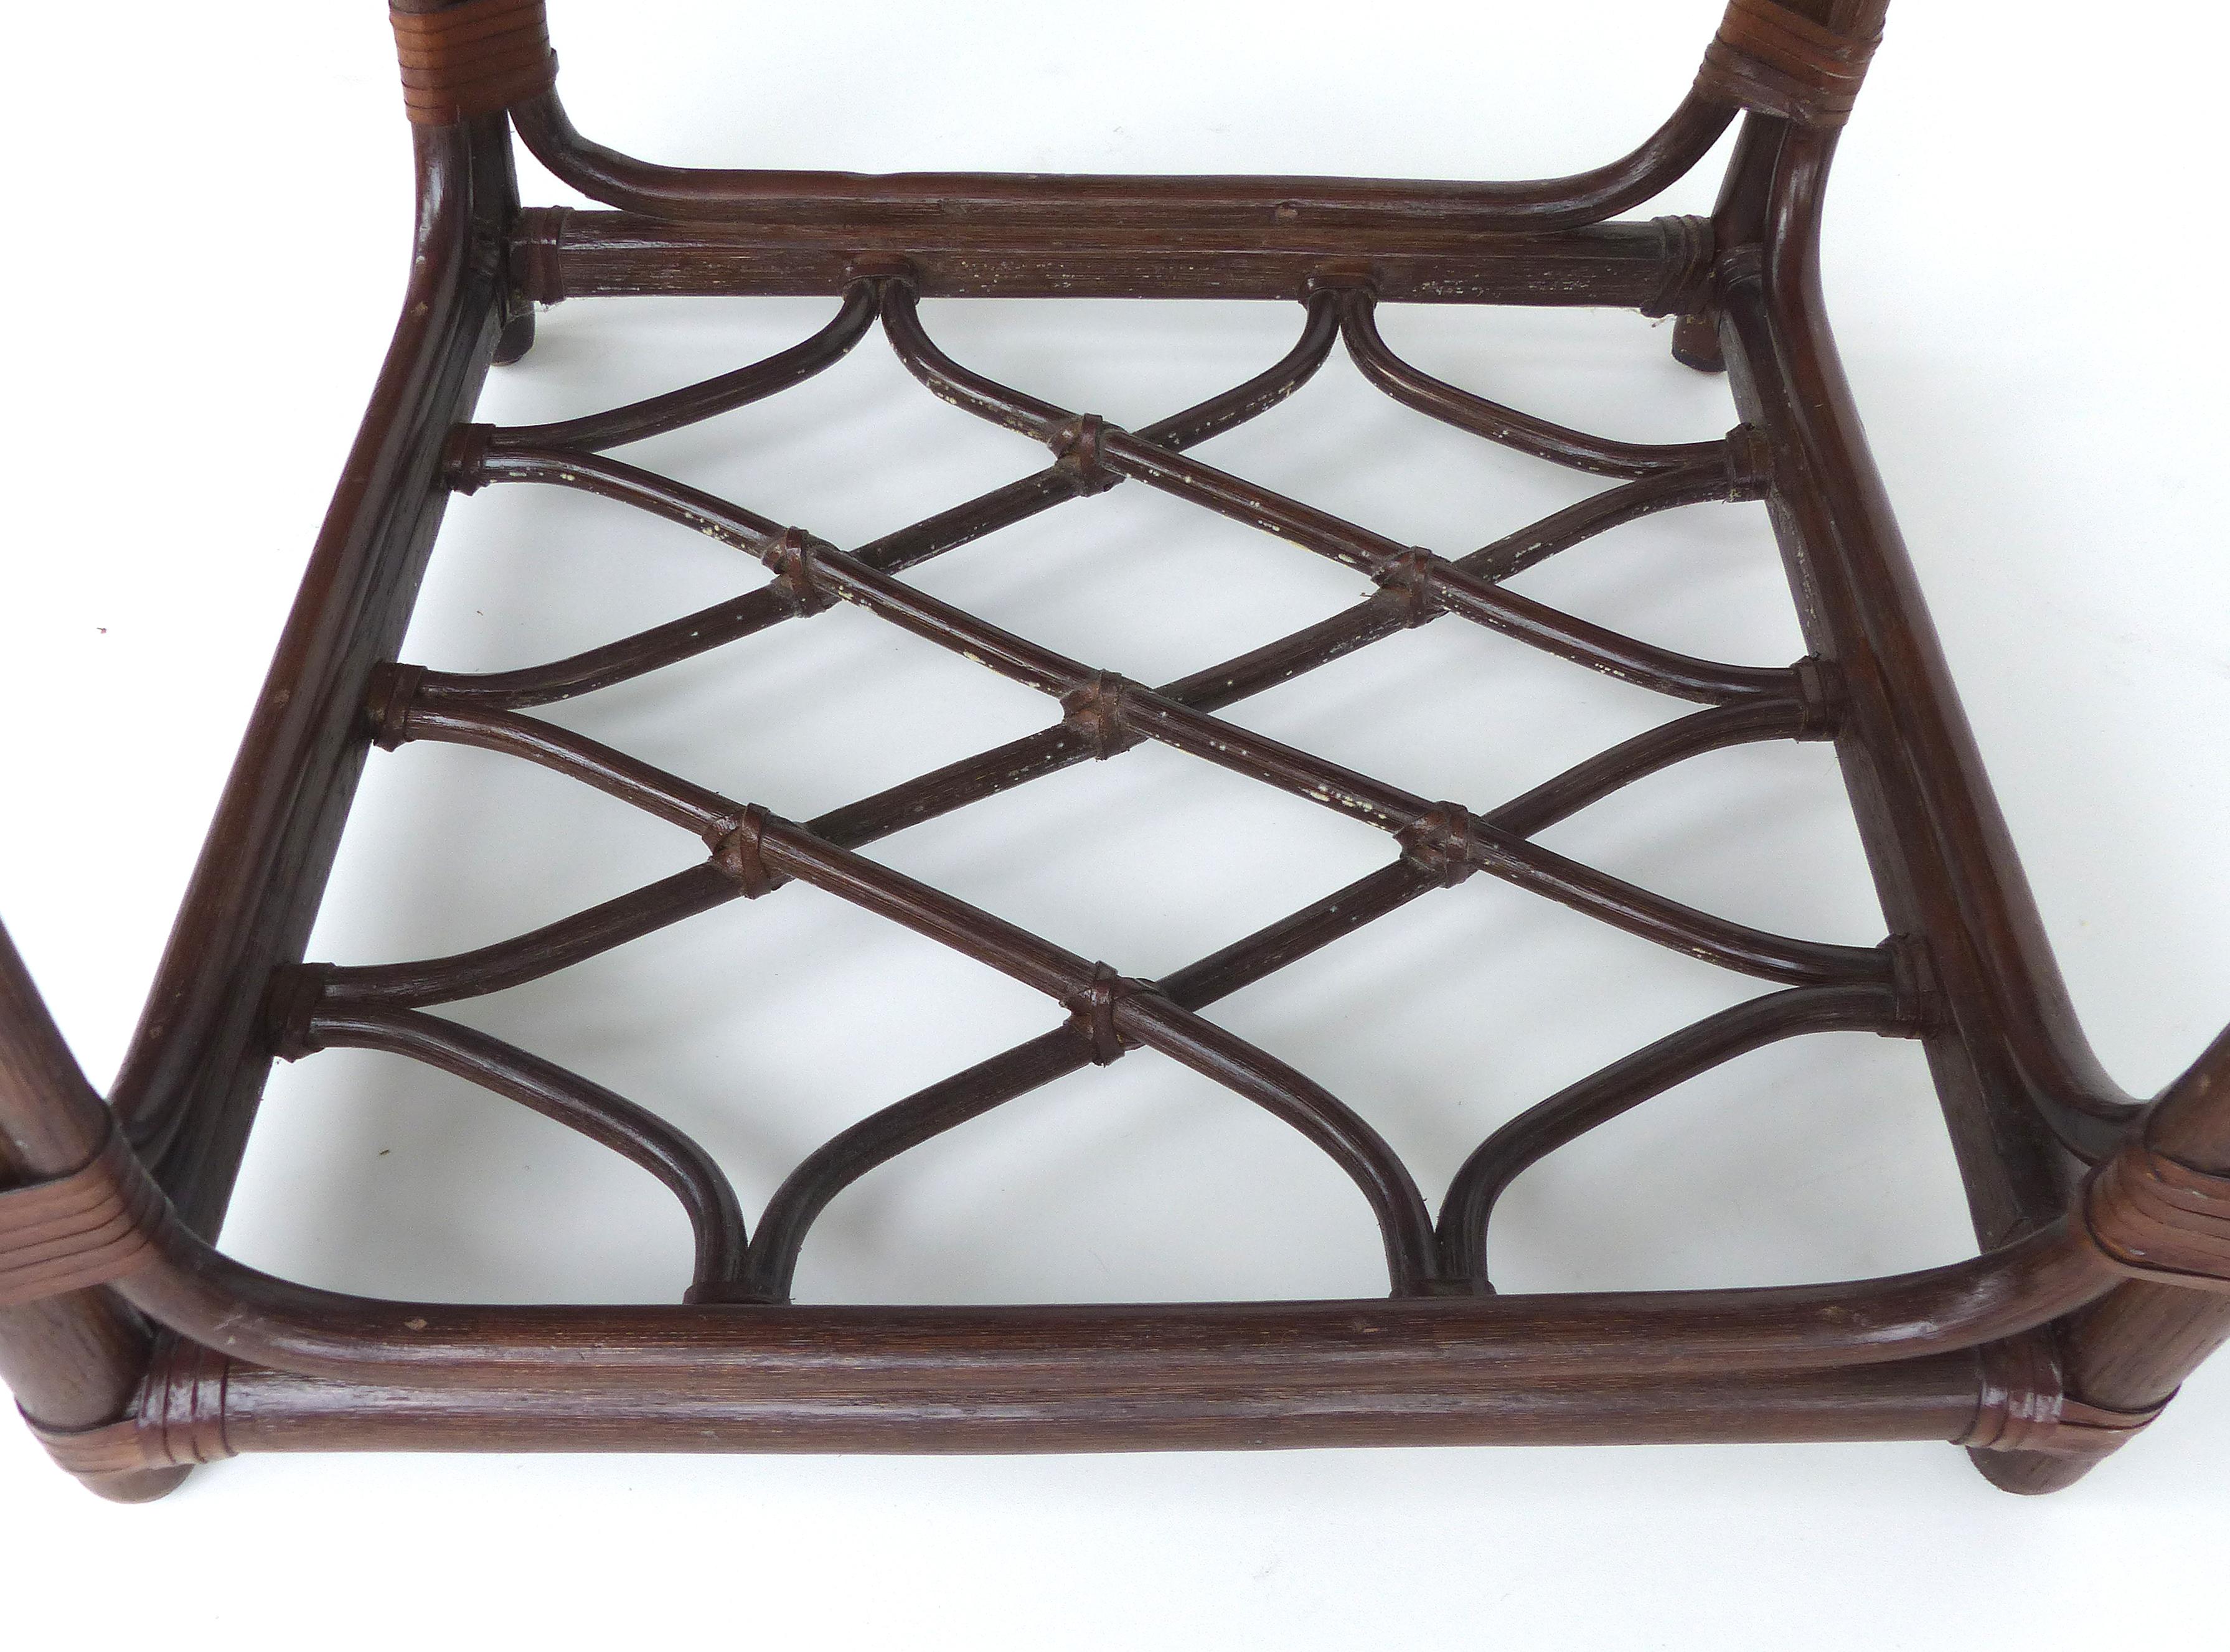 Rattan Side Table, Criss Cross Design, Leather Strapping attributed to McGuire 6